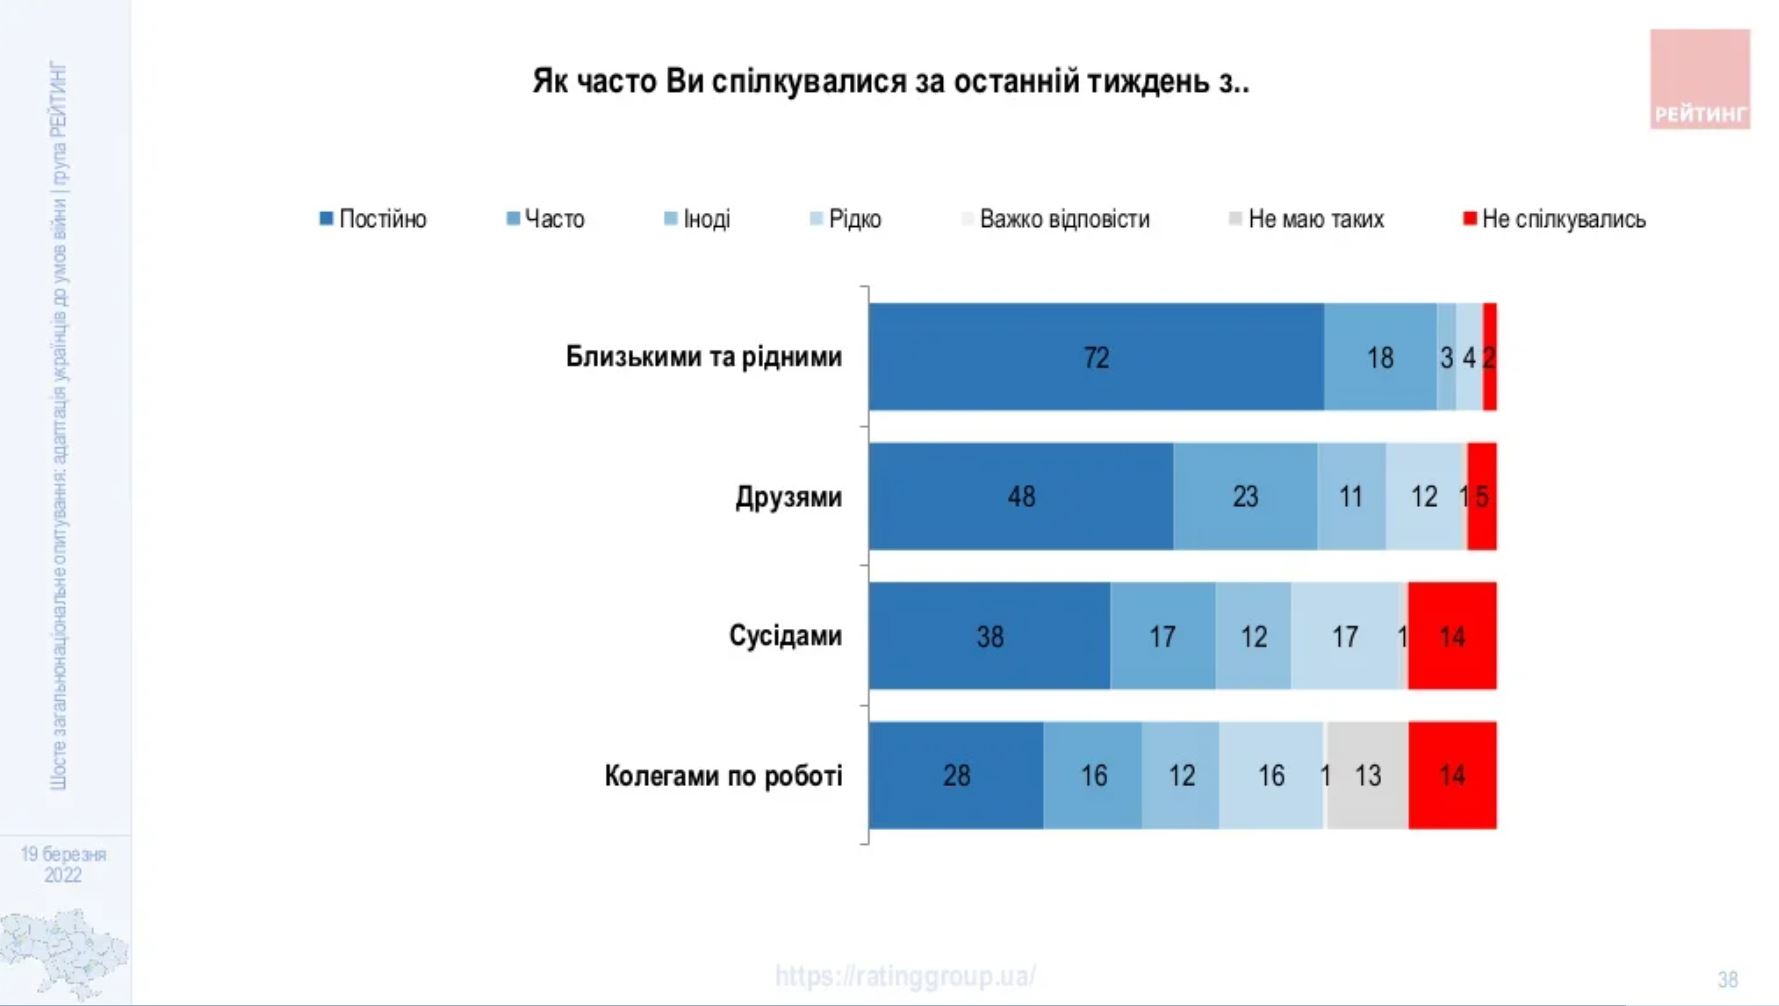 During the war, most Ukrainians began to communicate more often with relatives - a poll